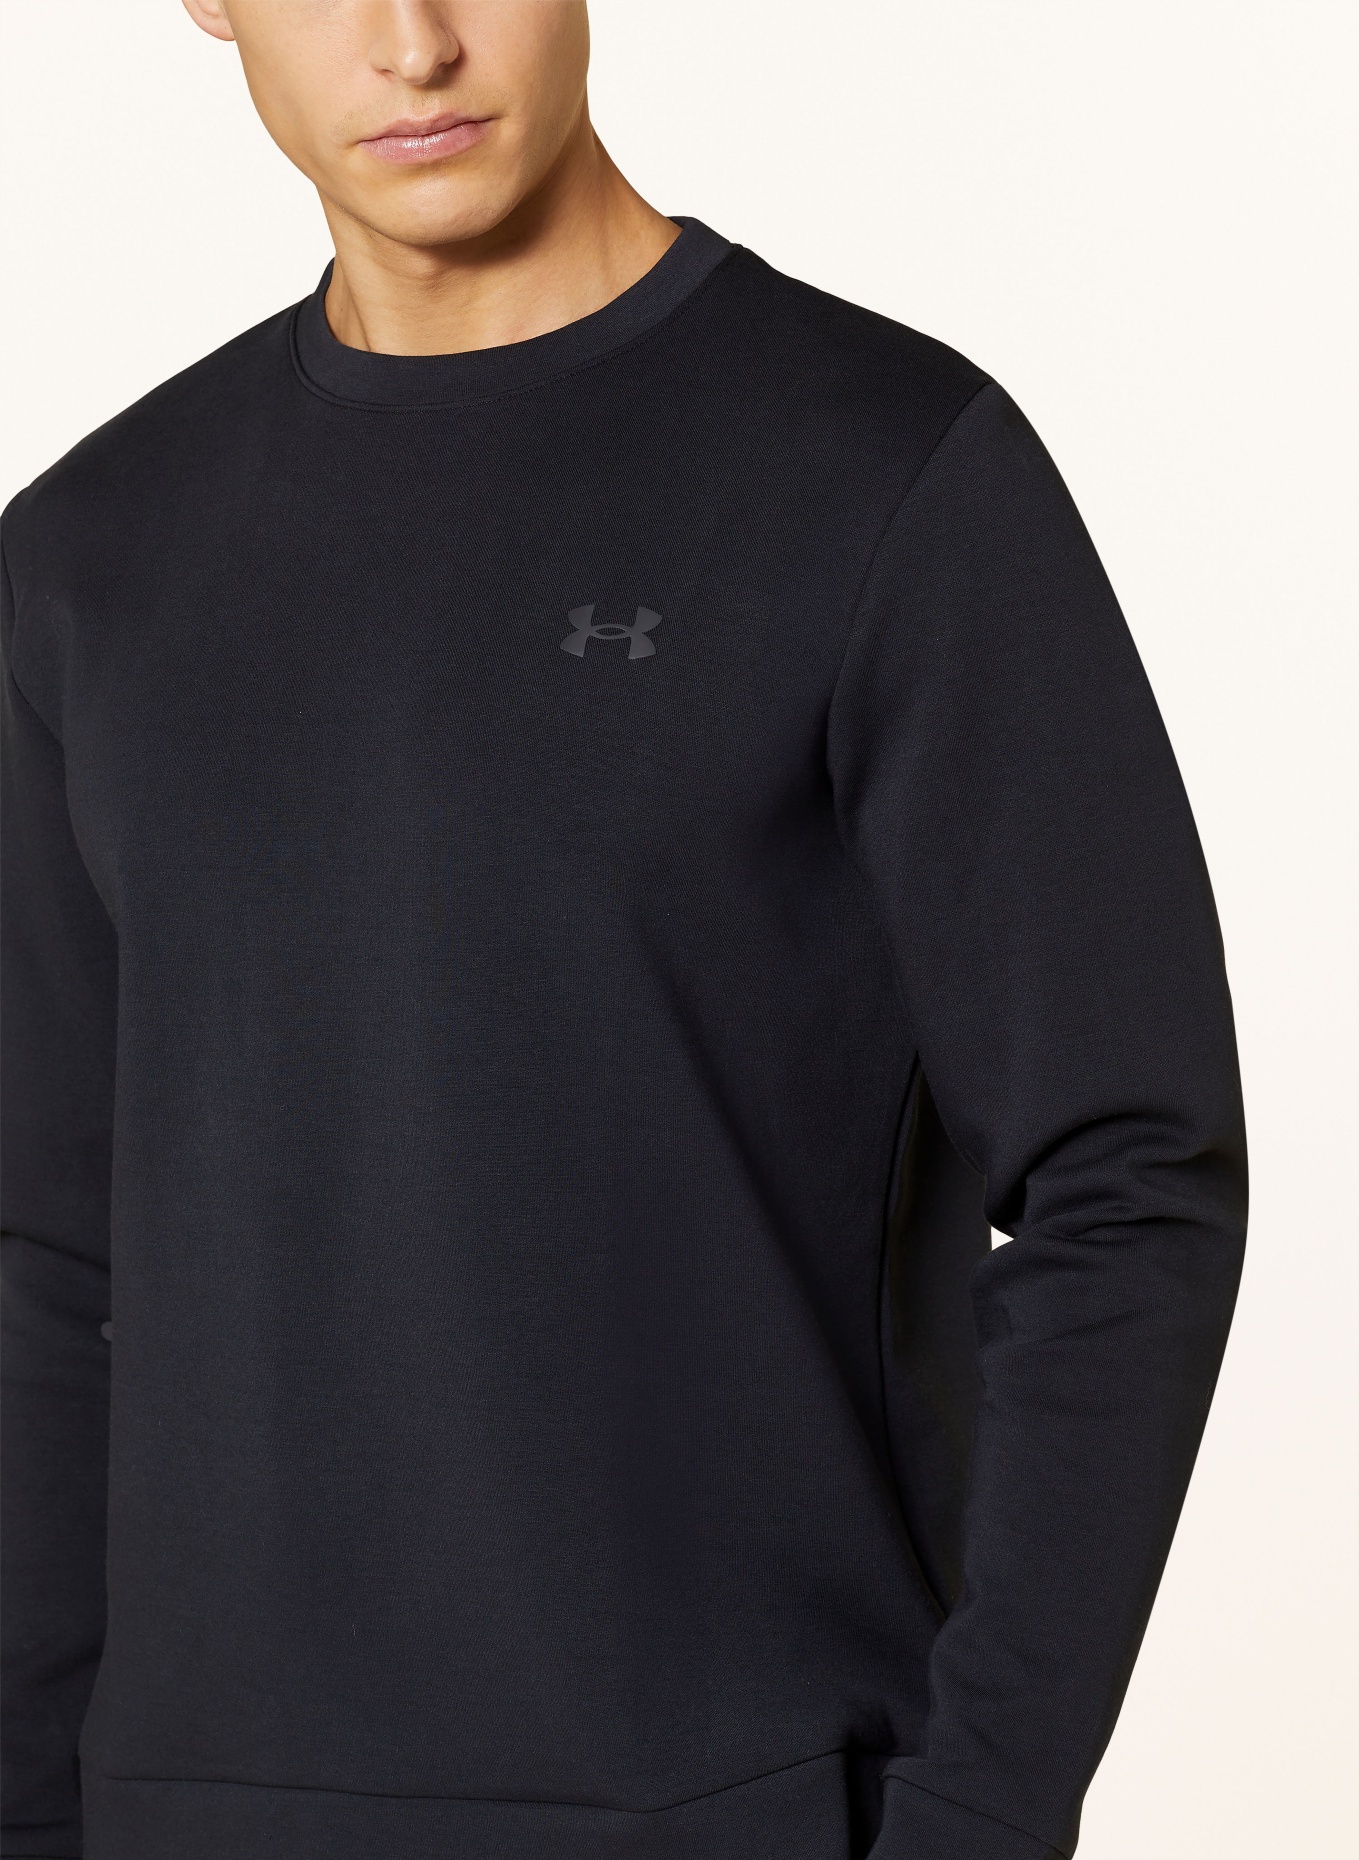 UNDER ARMOUR Sweatshirt UNSTOPPABLE in black